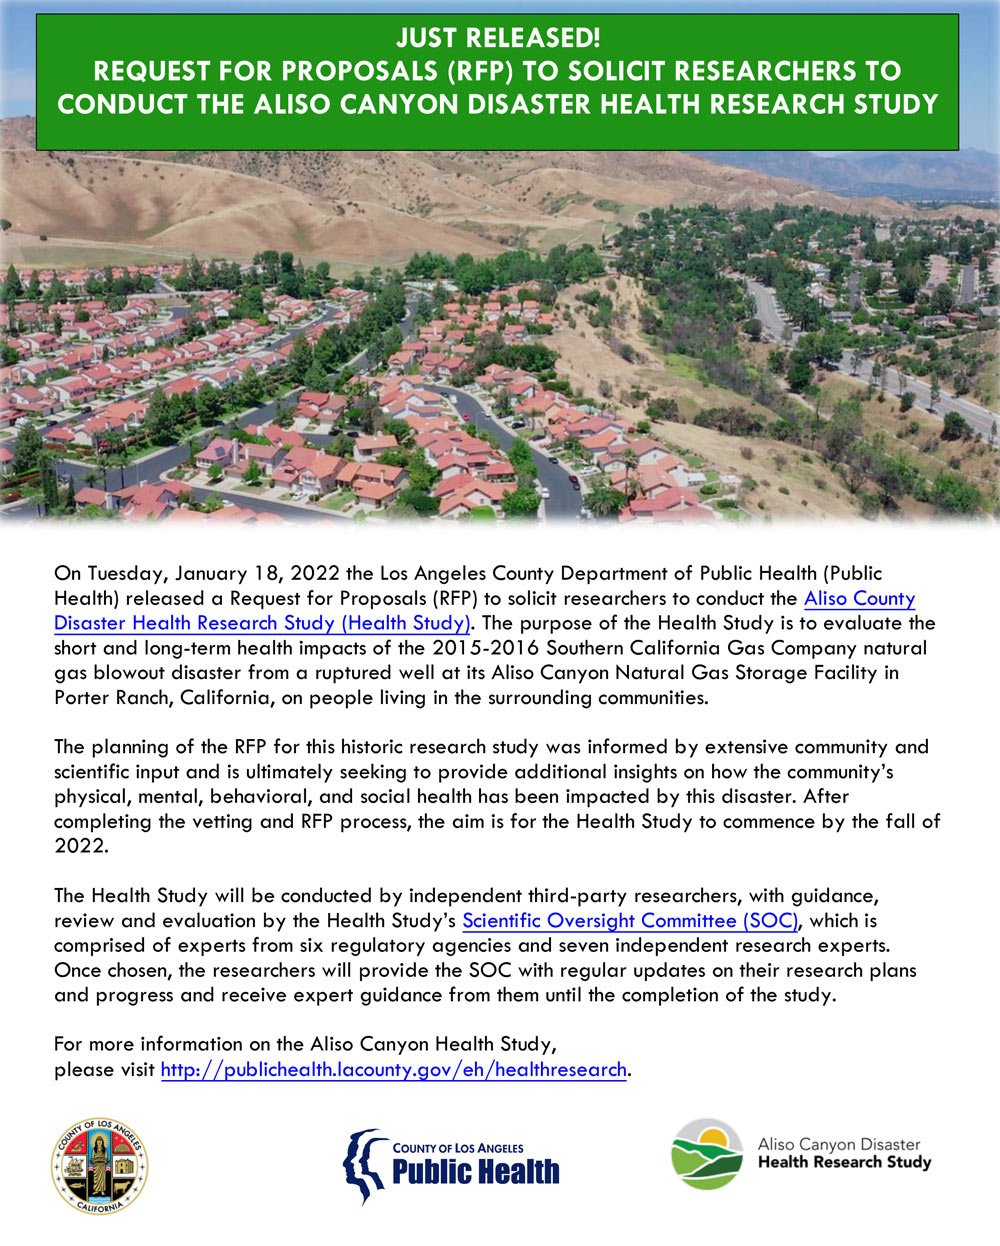 Request for Proposals (RFP) to Solicit Researchers to Conduct the Aliso Canyon Disaster Health Research Study